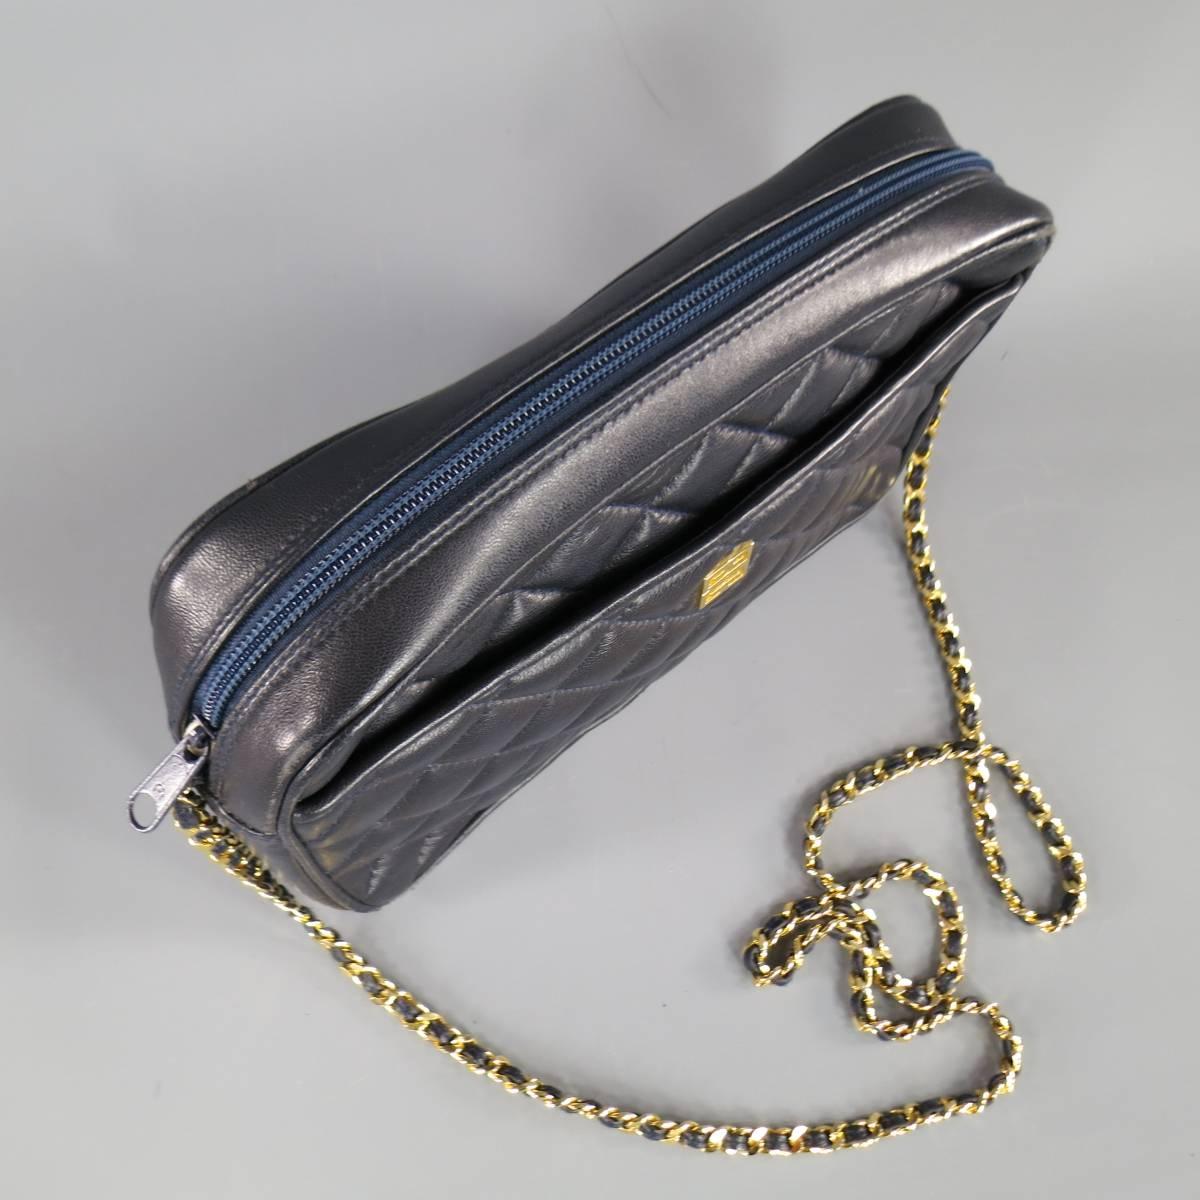 This vintage GIVENCHY shoulder bag comes in quilted navy leather and features the classic G logo in yellow gold hardware and a long gold chain strap with leather weaving. Natural wear on leather in detail shots.
 
Good Pre-Owned Condition.
